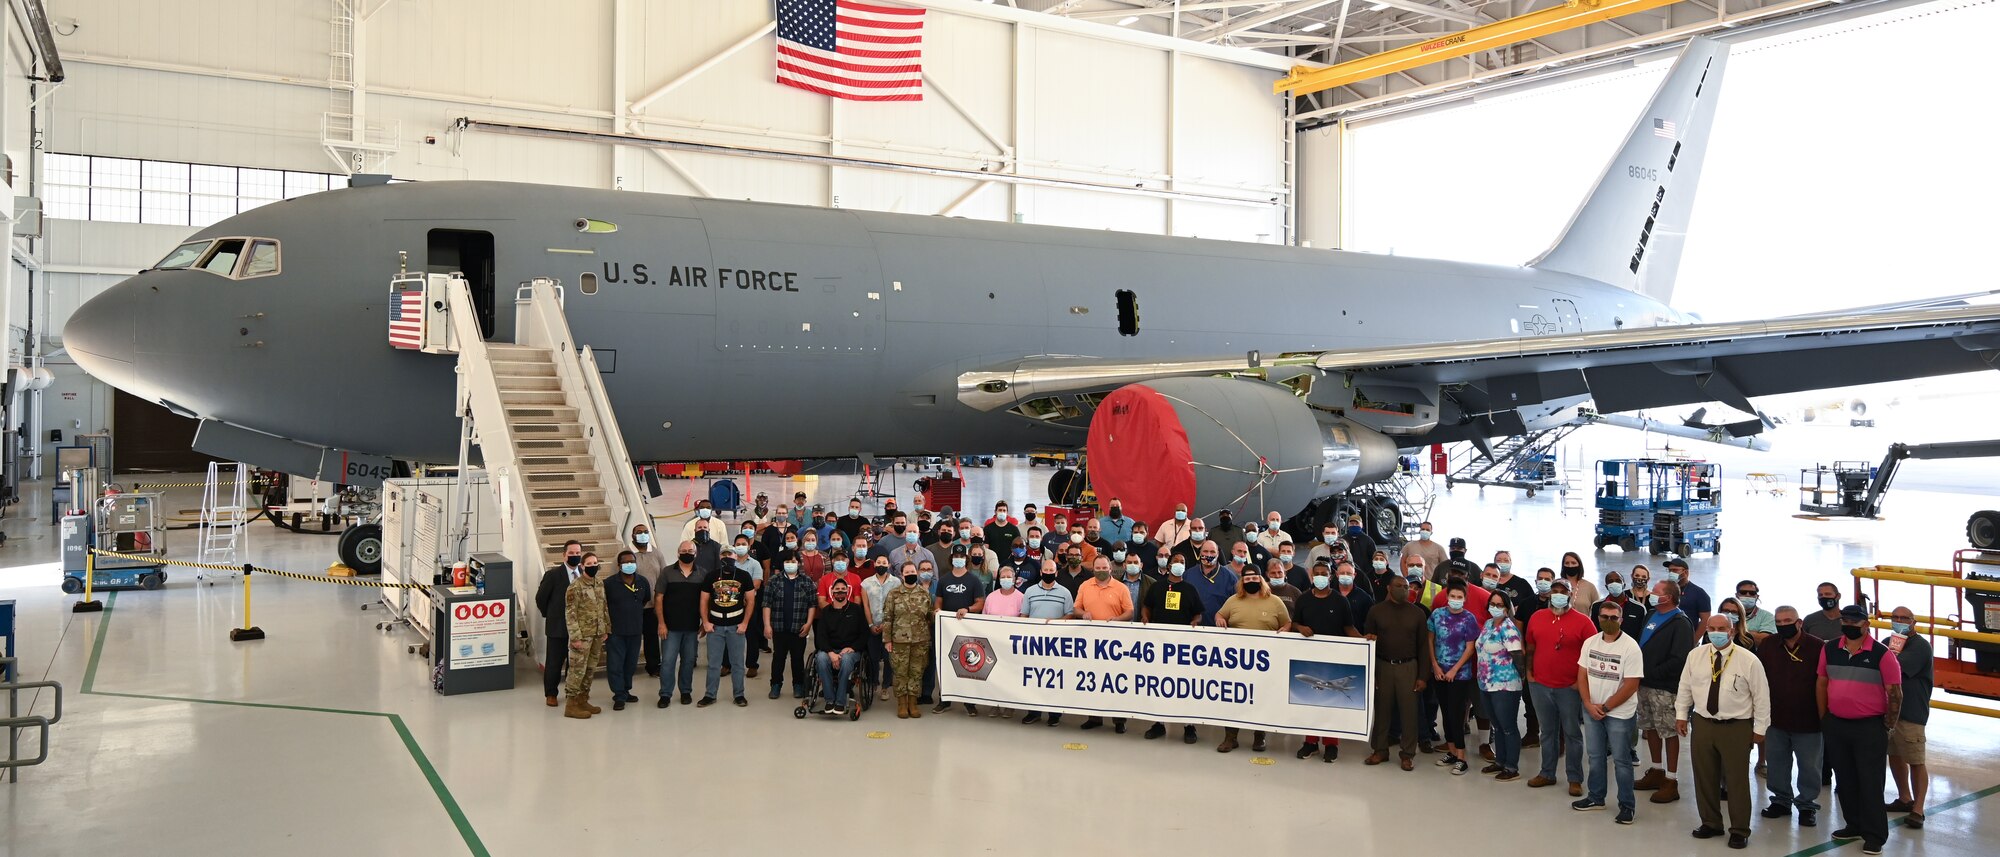 Group photo of people in front of aircraft in hangar